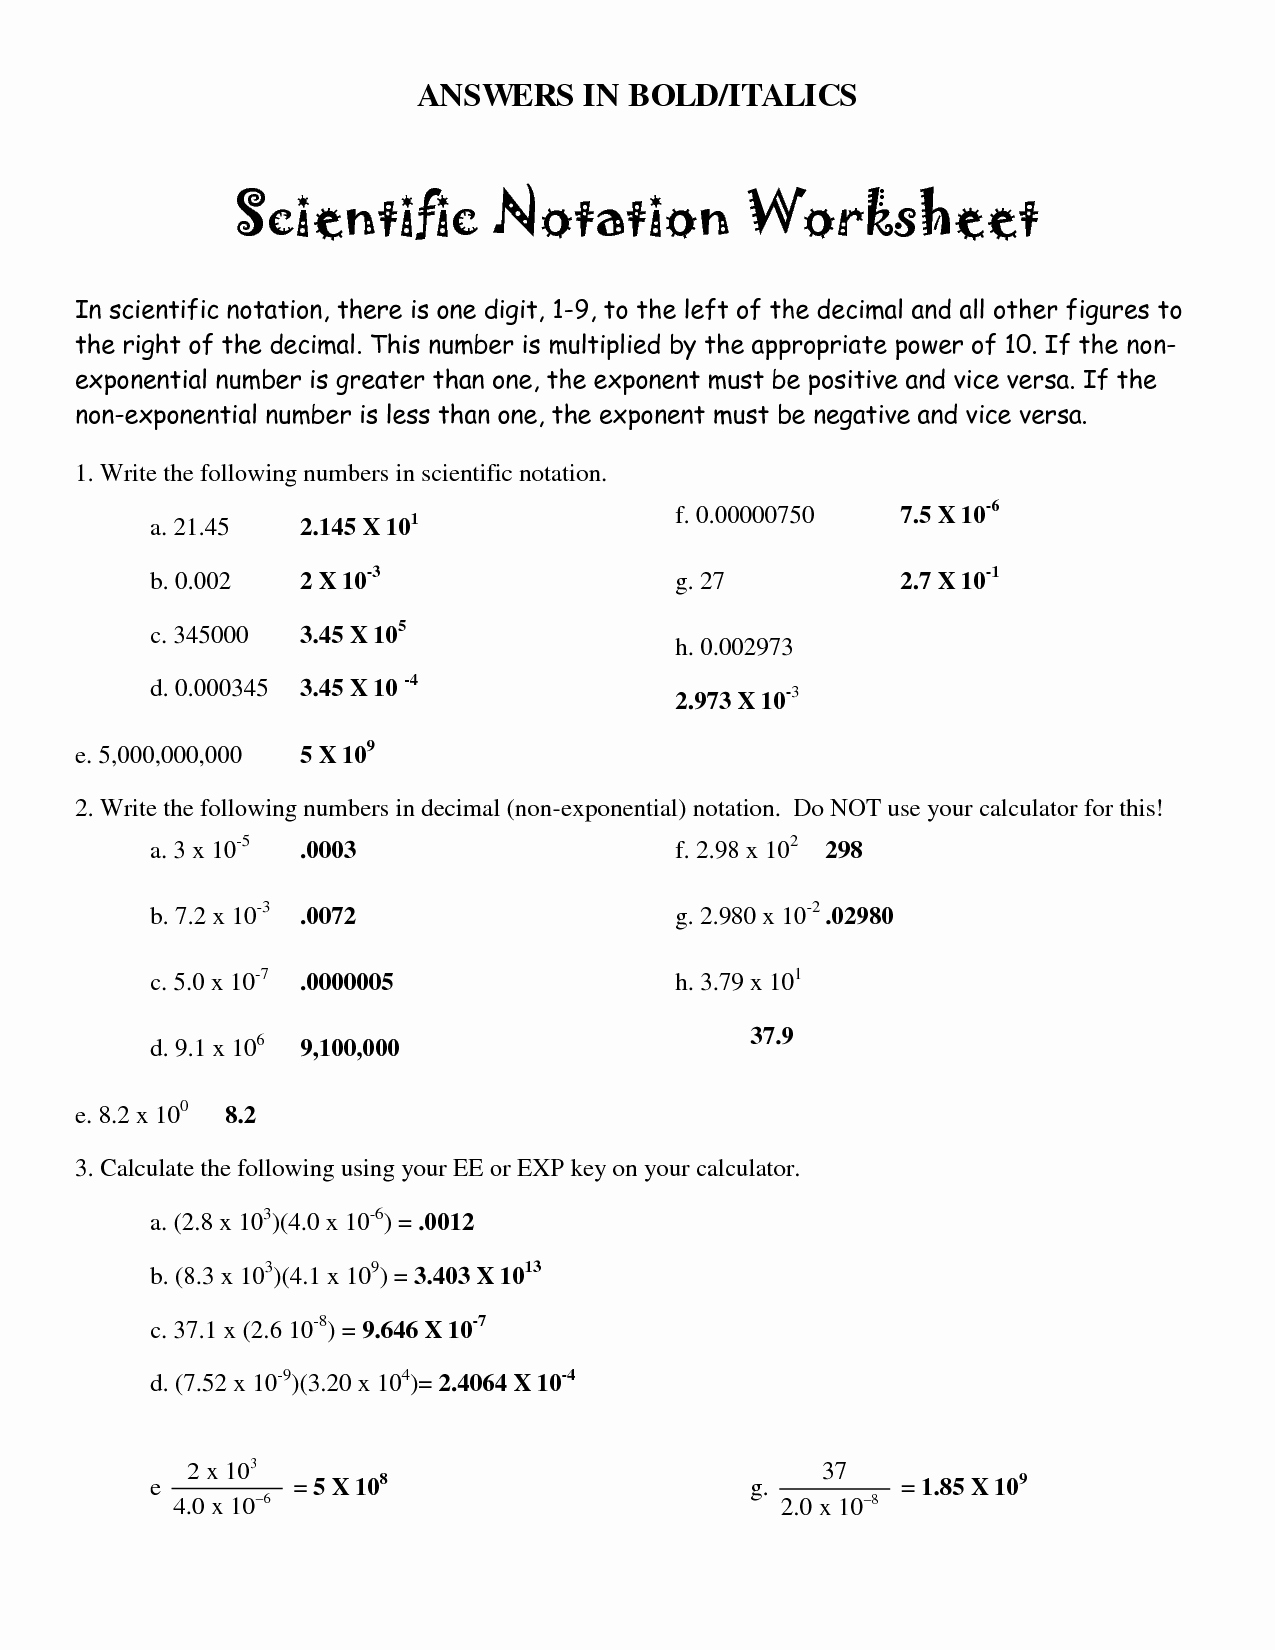 Scientific Notation Worksheet Answers Best Of Worksheet Scientific Notation Part 2 Answers